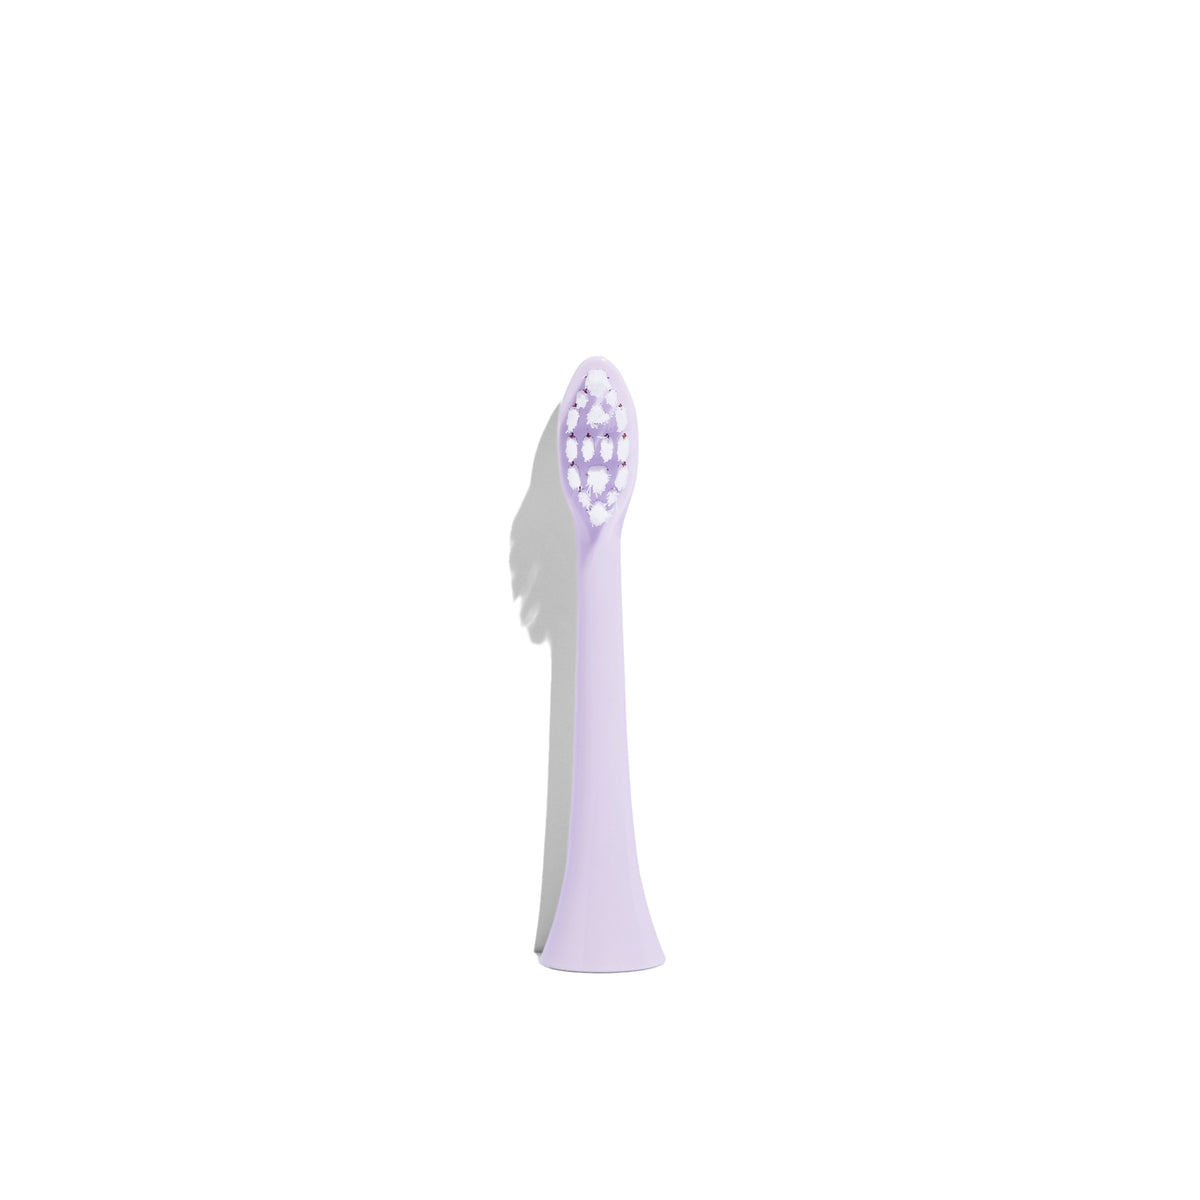 Gem Electric Toothbrush Replacement Heads: Rose